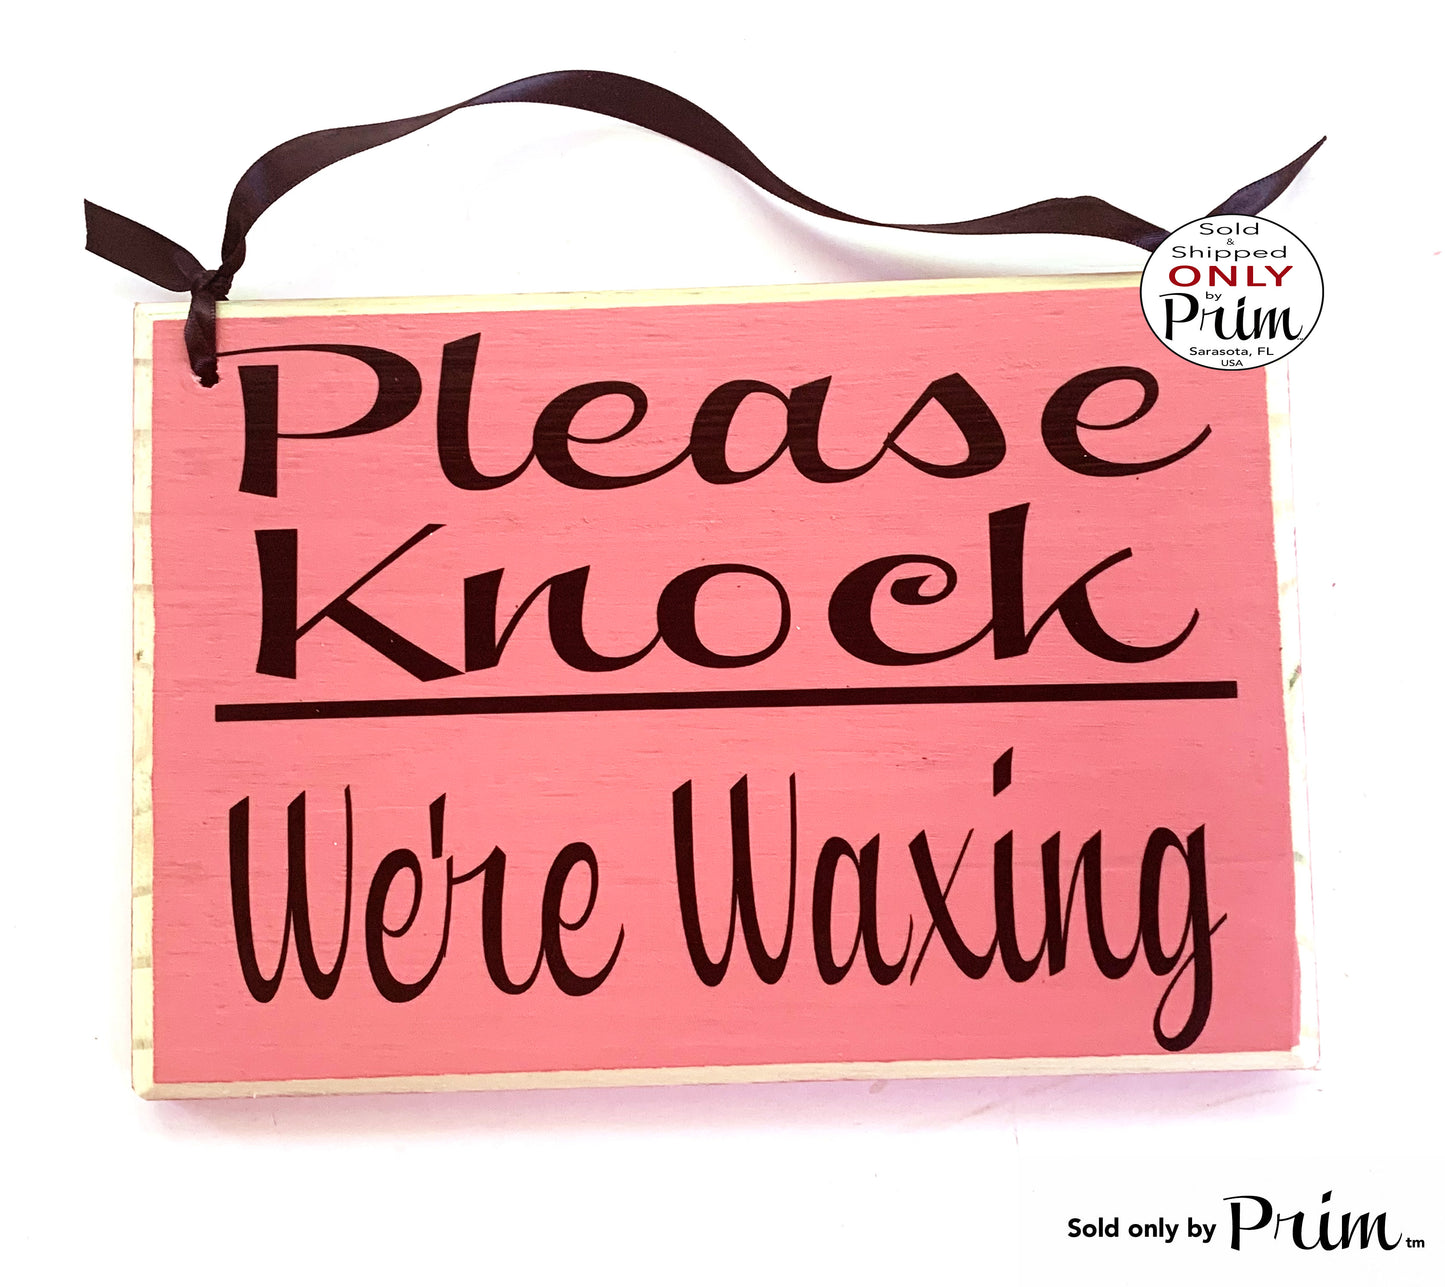 Designs by Prim 8x6 Please Knock We're Waxing Custom Wood Sign Wax Service In Progress Be With You Shortly Spa Facial Treatment Eyebrow Lashes Plaque